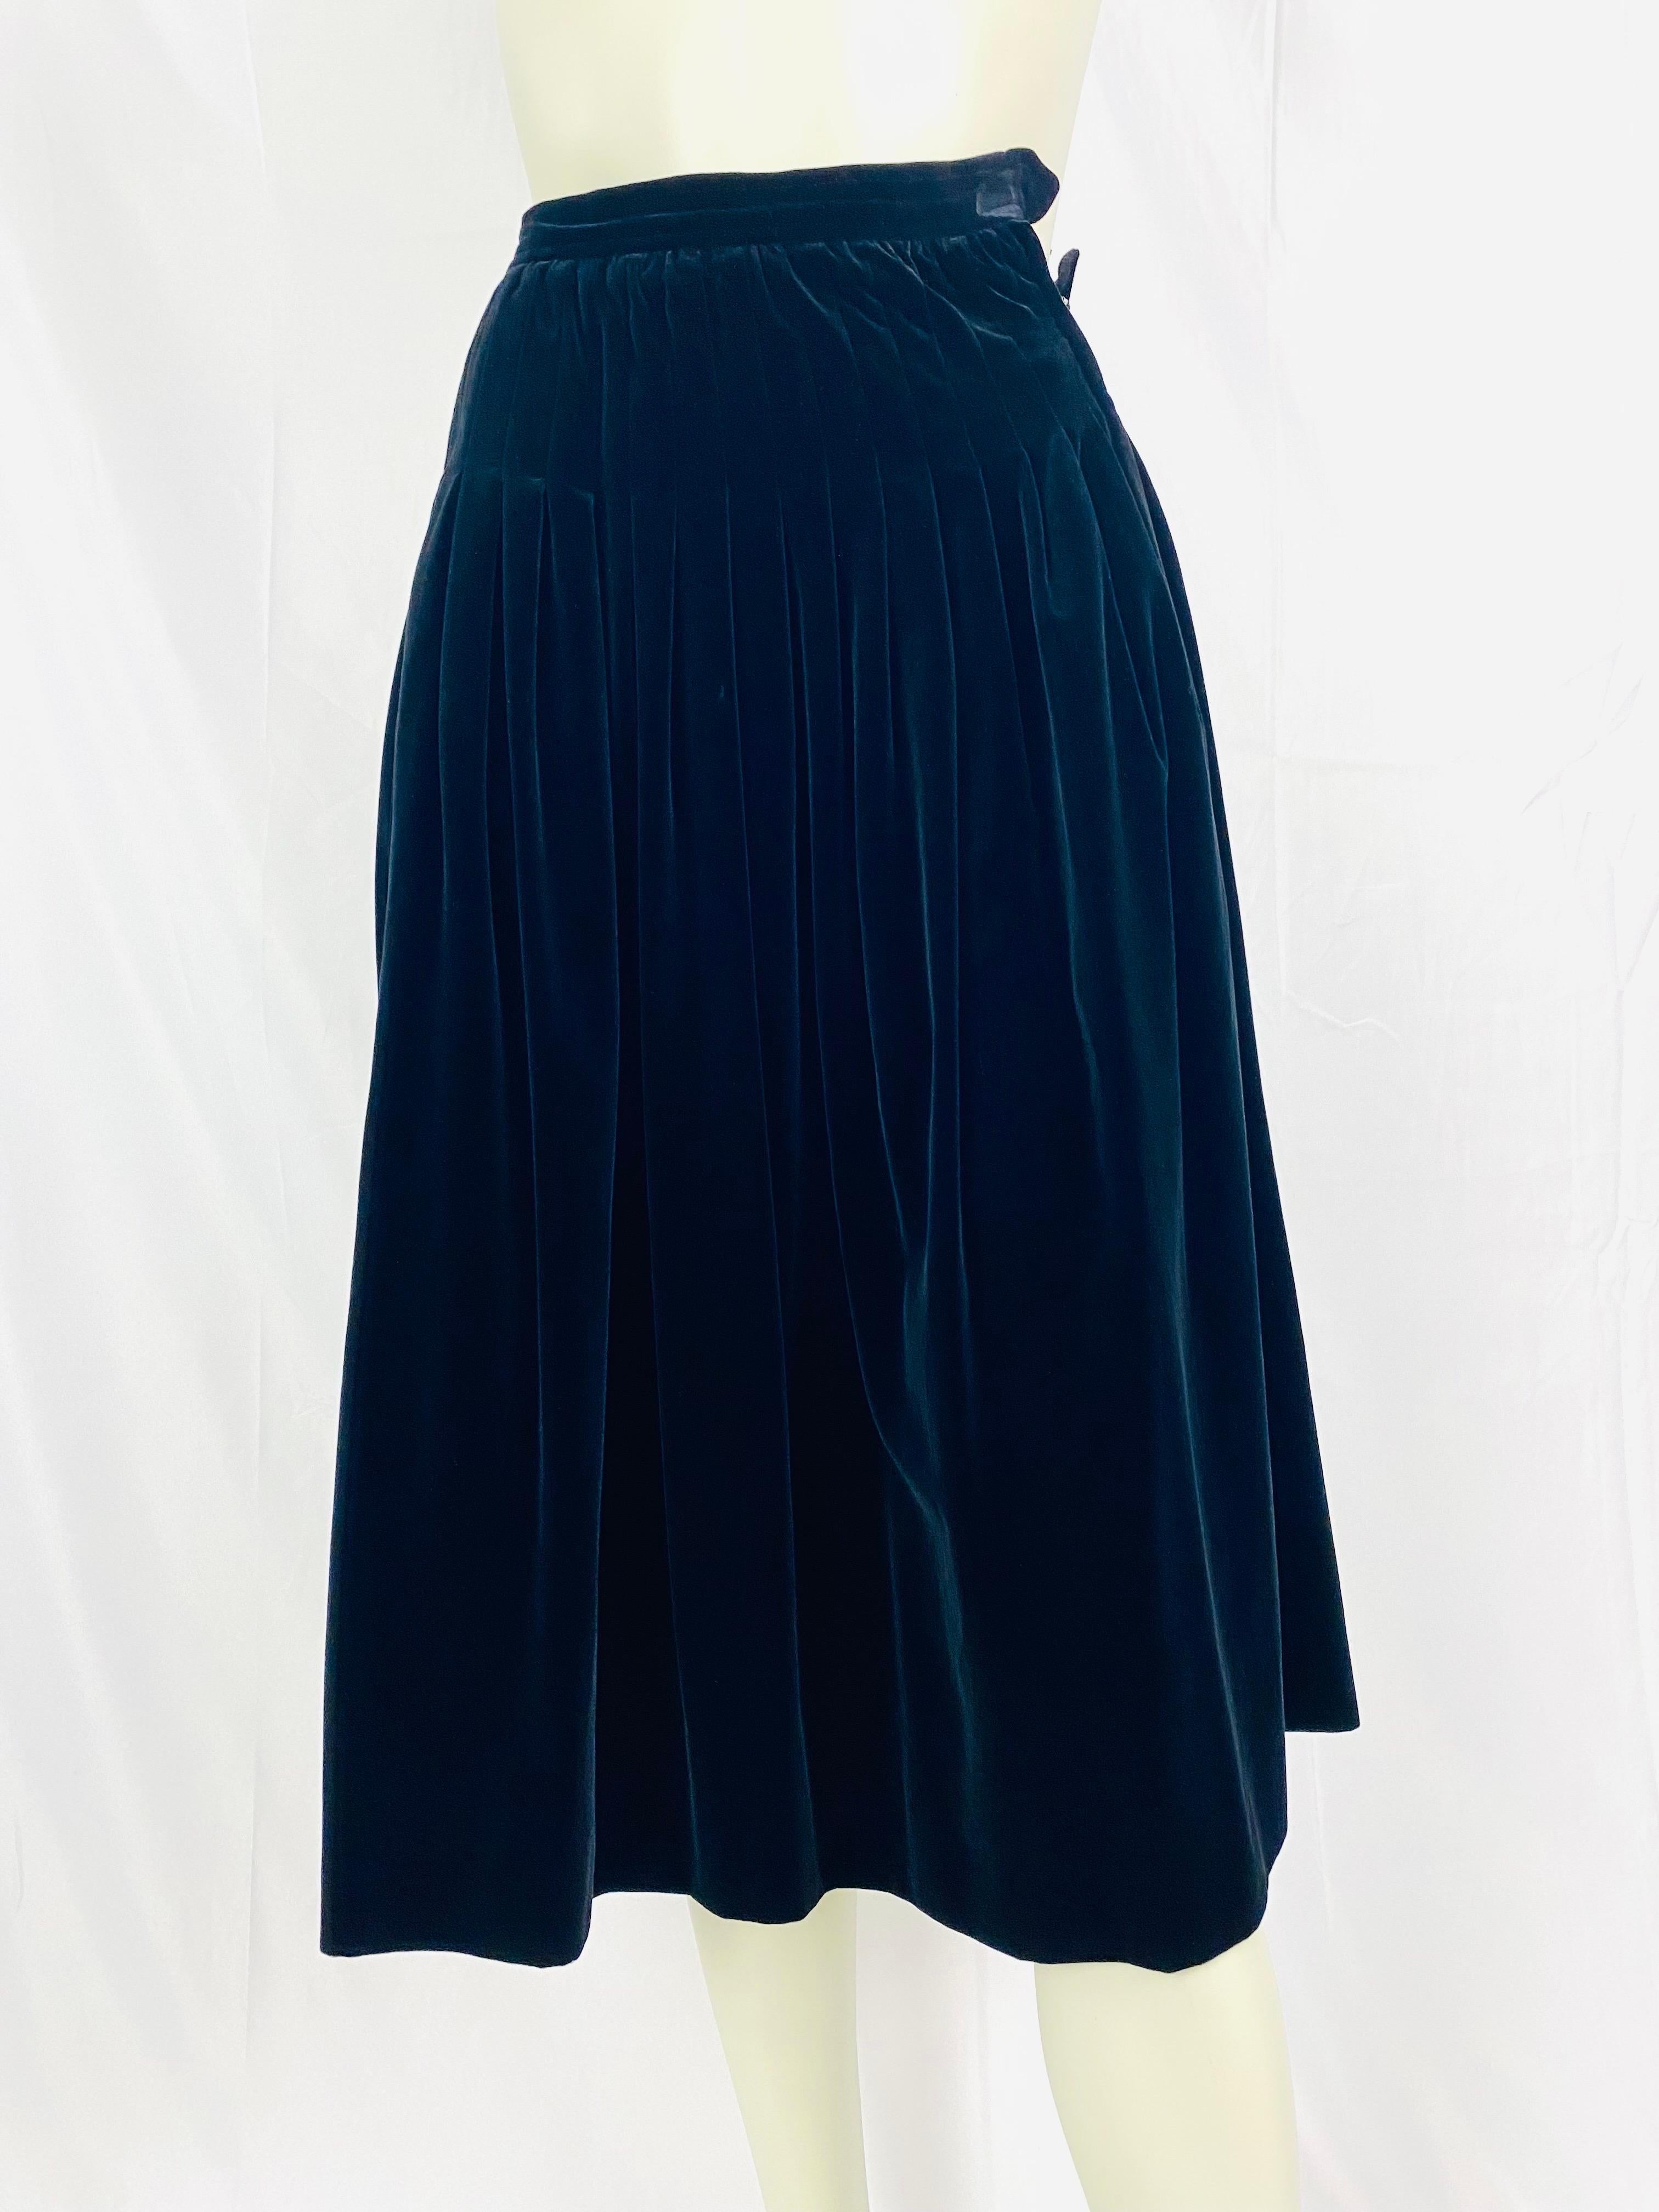 Essential vintage Yves Saint Laurent rive gauche skirt in black velvet from the 1970s.
High waisted, pleated, below the knee length.
Side zipper, closing with a large hook.
Discreet hip pockets.
Note, a small hitch on the seam in a fold at the back